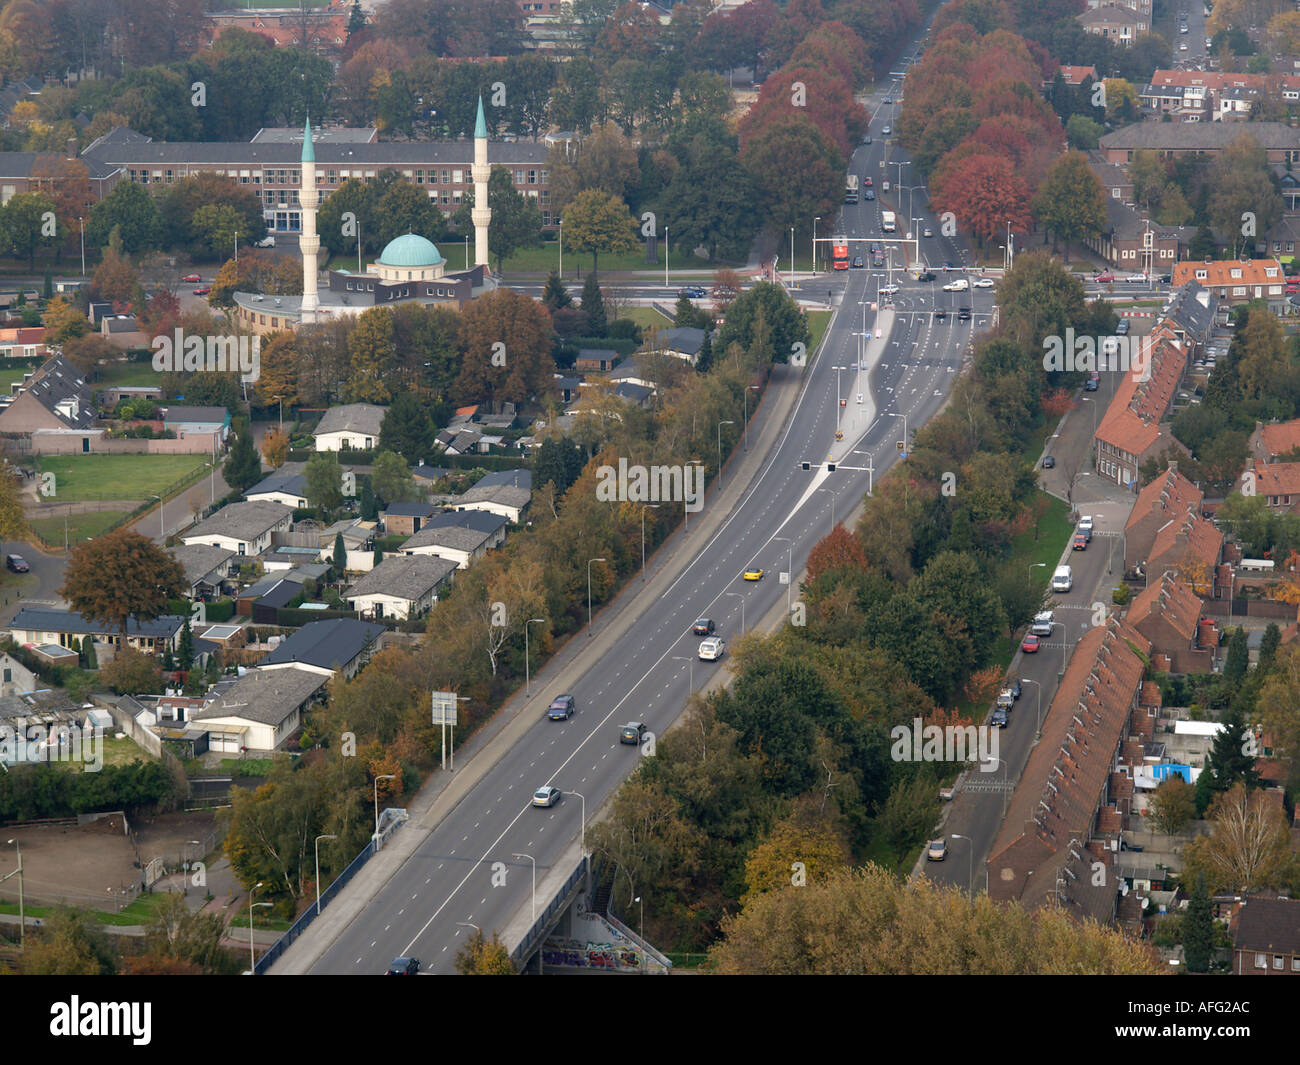 View on part of Tilburg the Netherlands with a newly built mosque with two high minarets Stock Photo